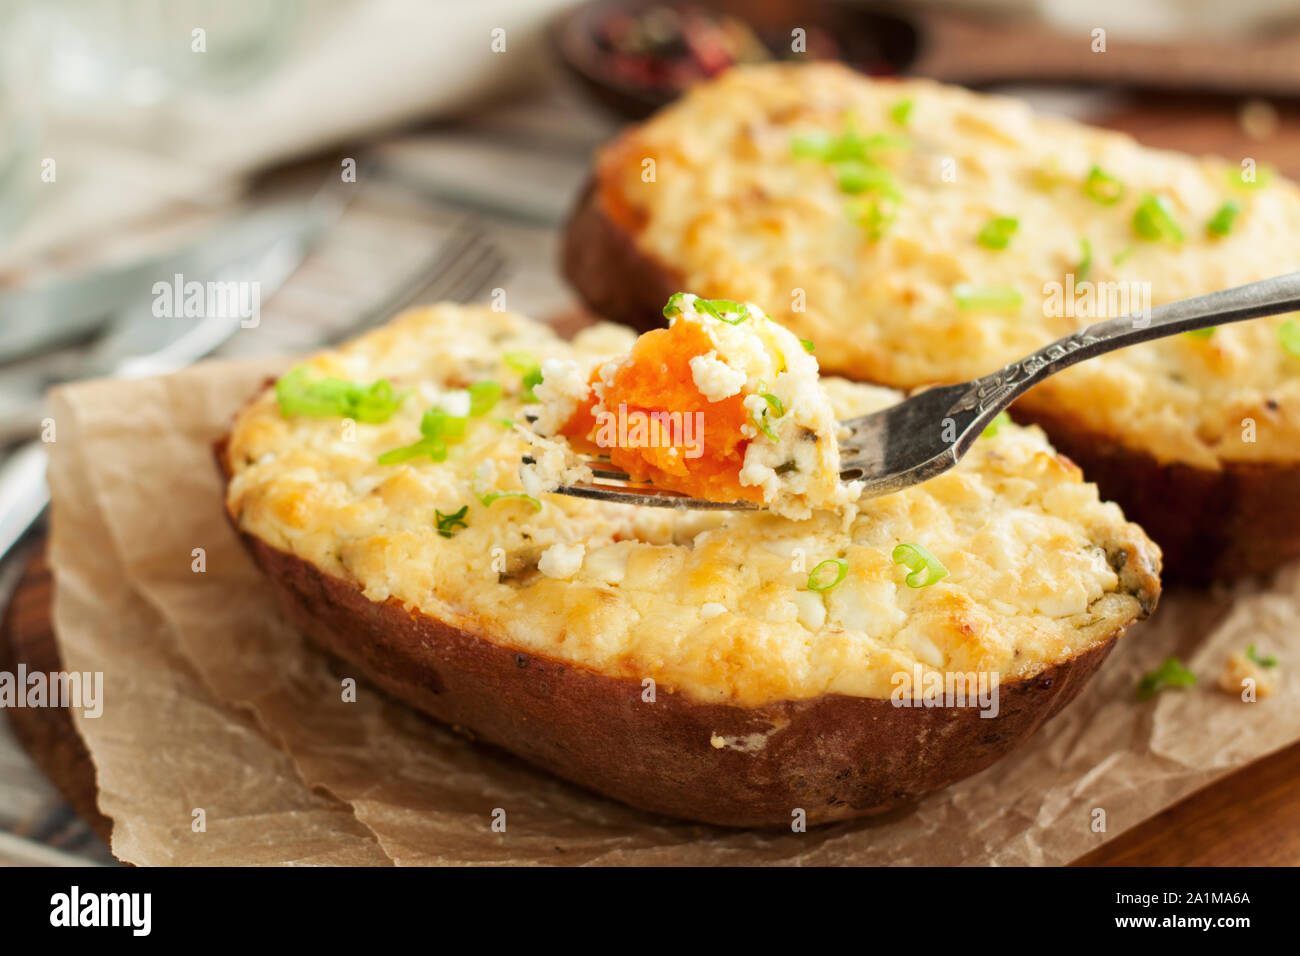 Backed sweet potatoes stuffed with eggs, cheeese and herbs on wooden cutting board Stock Photo